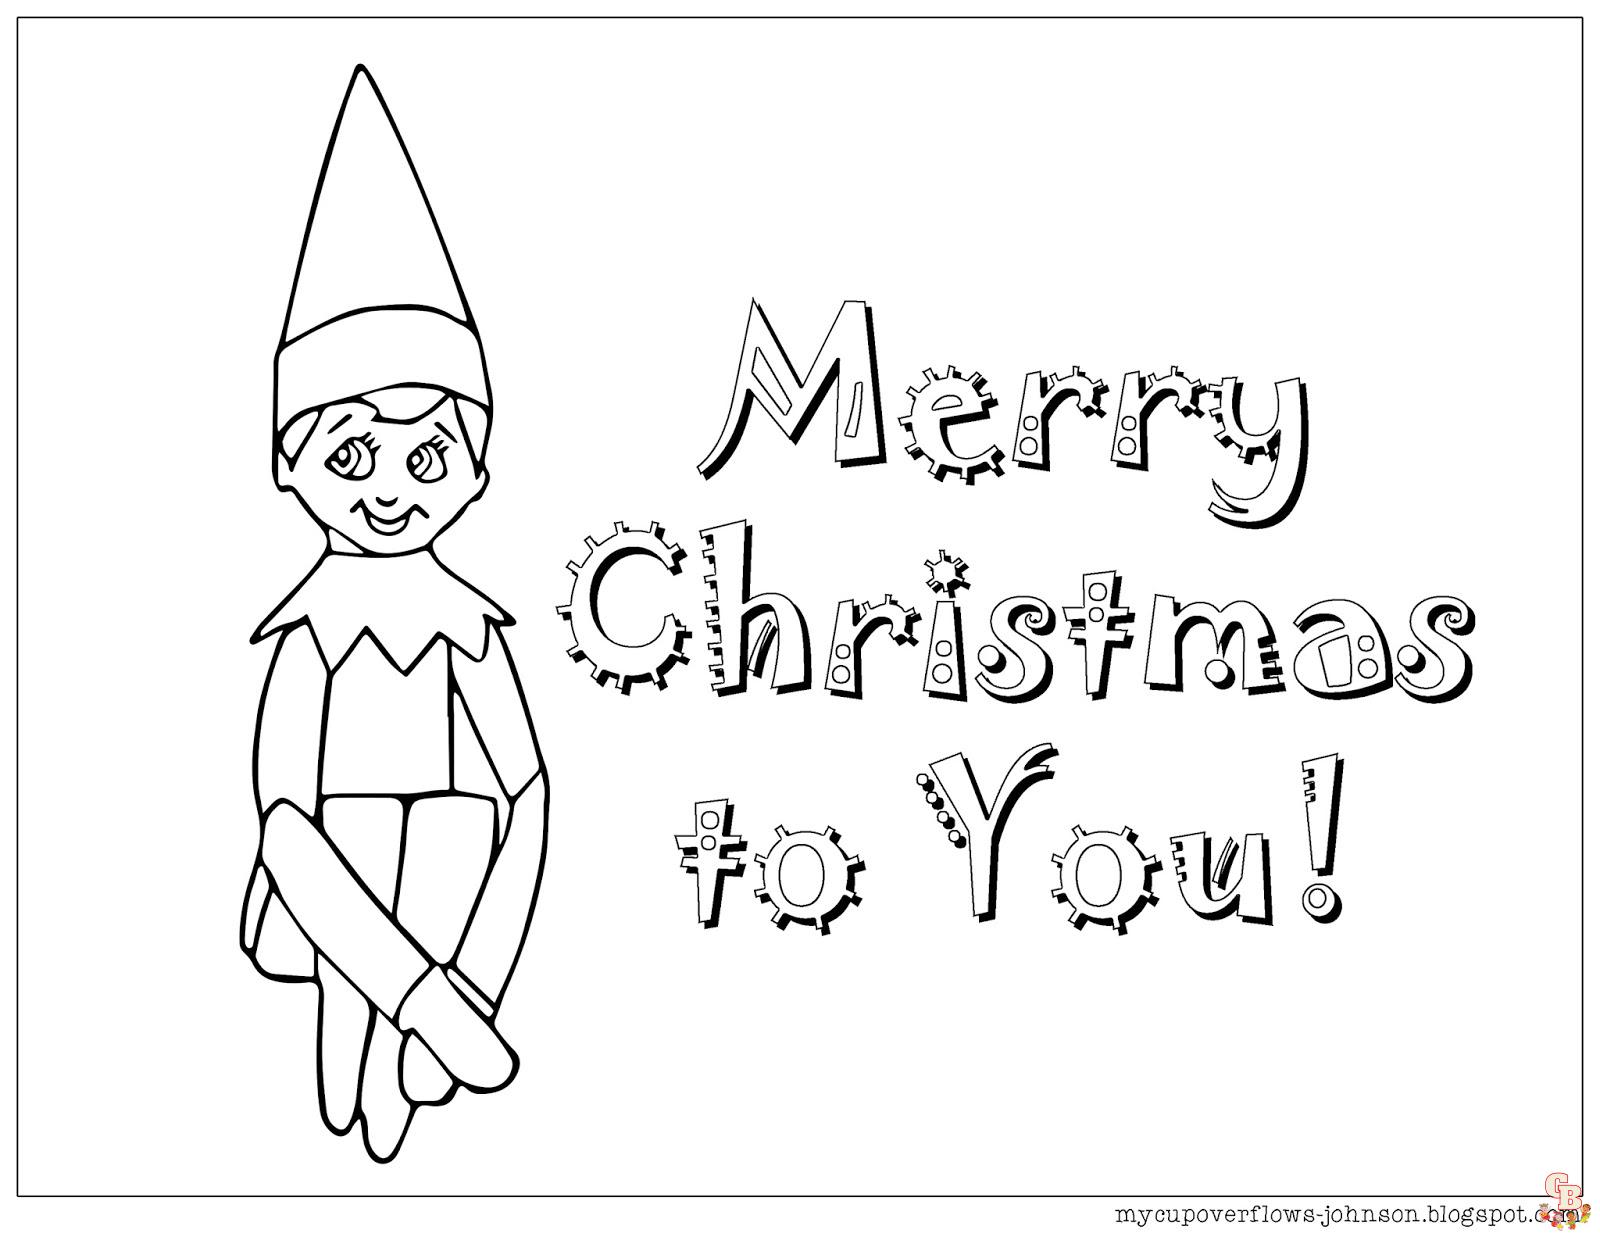 Elf on the Shelf Coloring Pages